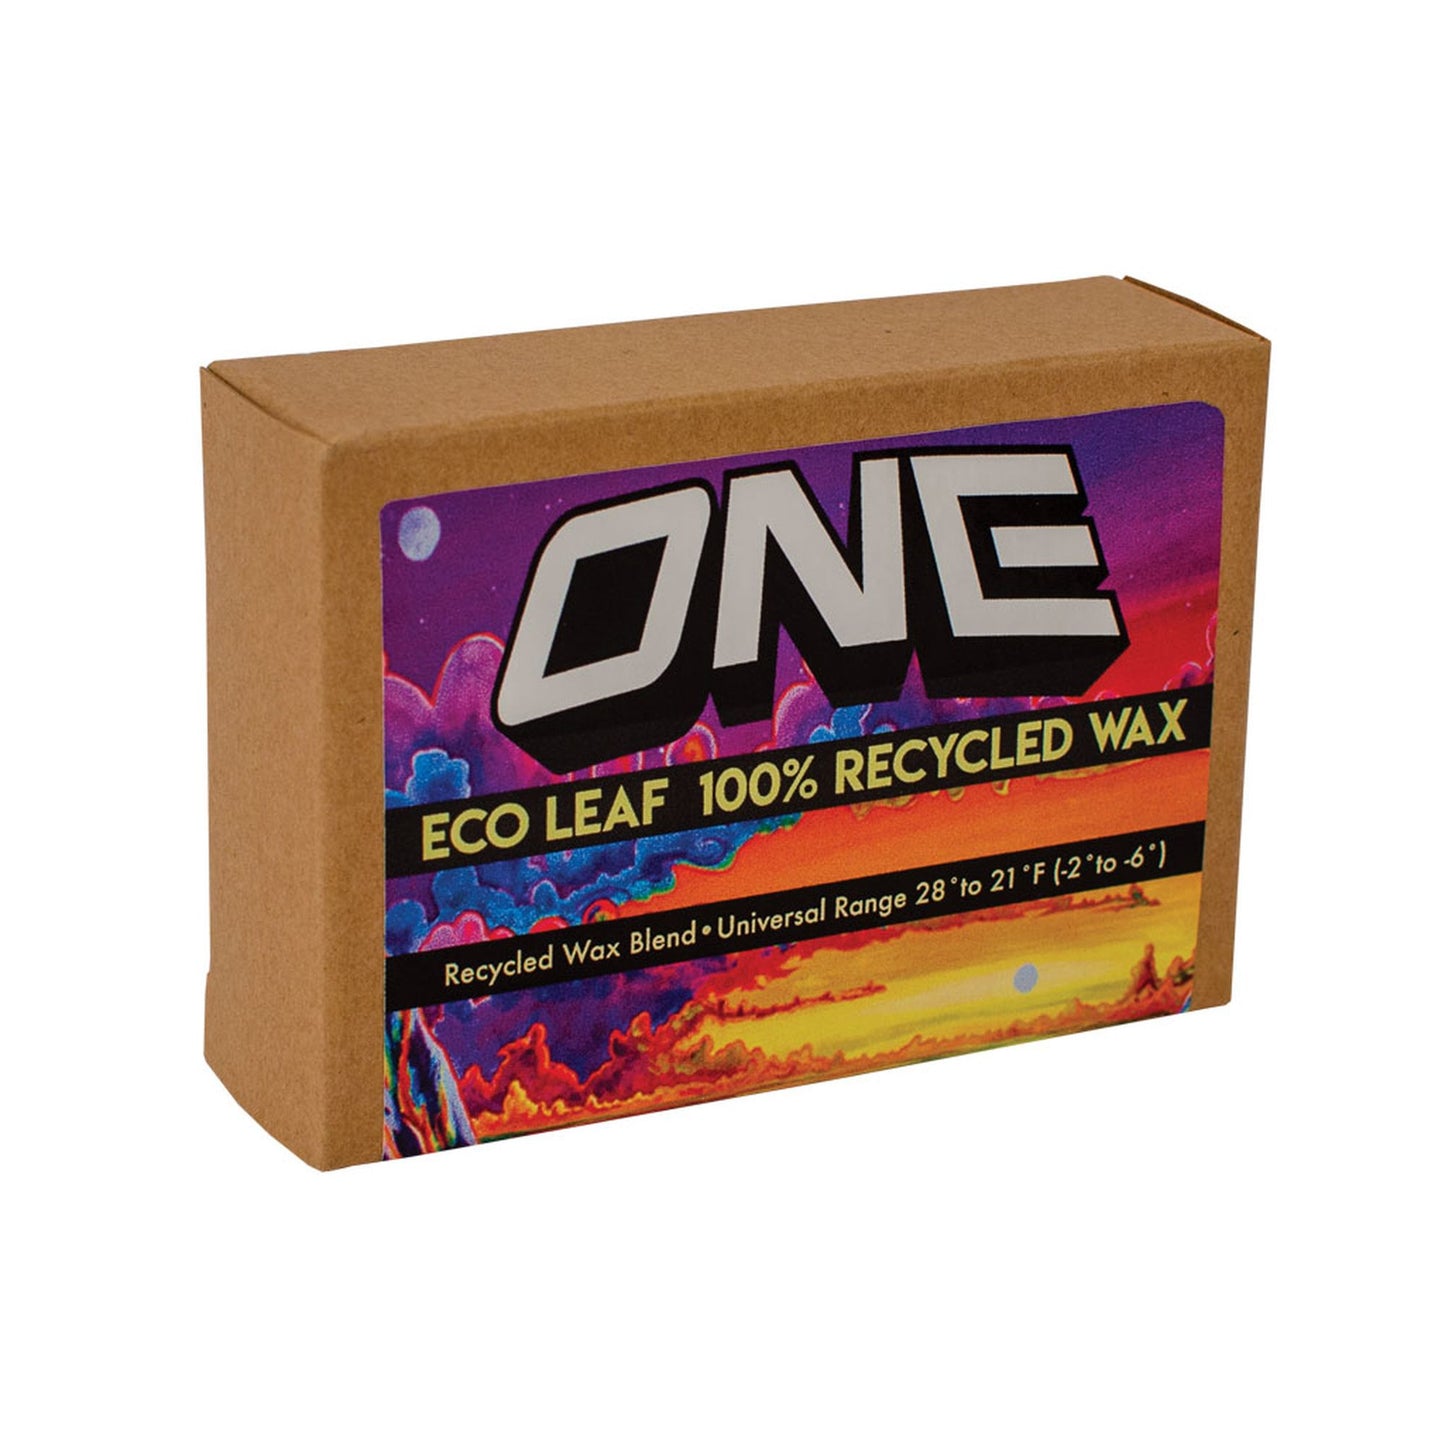 Oneball Eco Leaf 100% Recycled Snow Wax One Color OS Wax